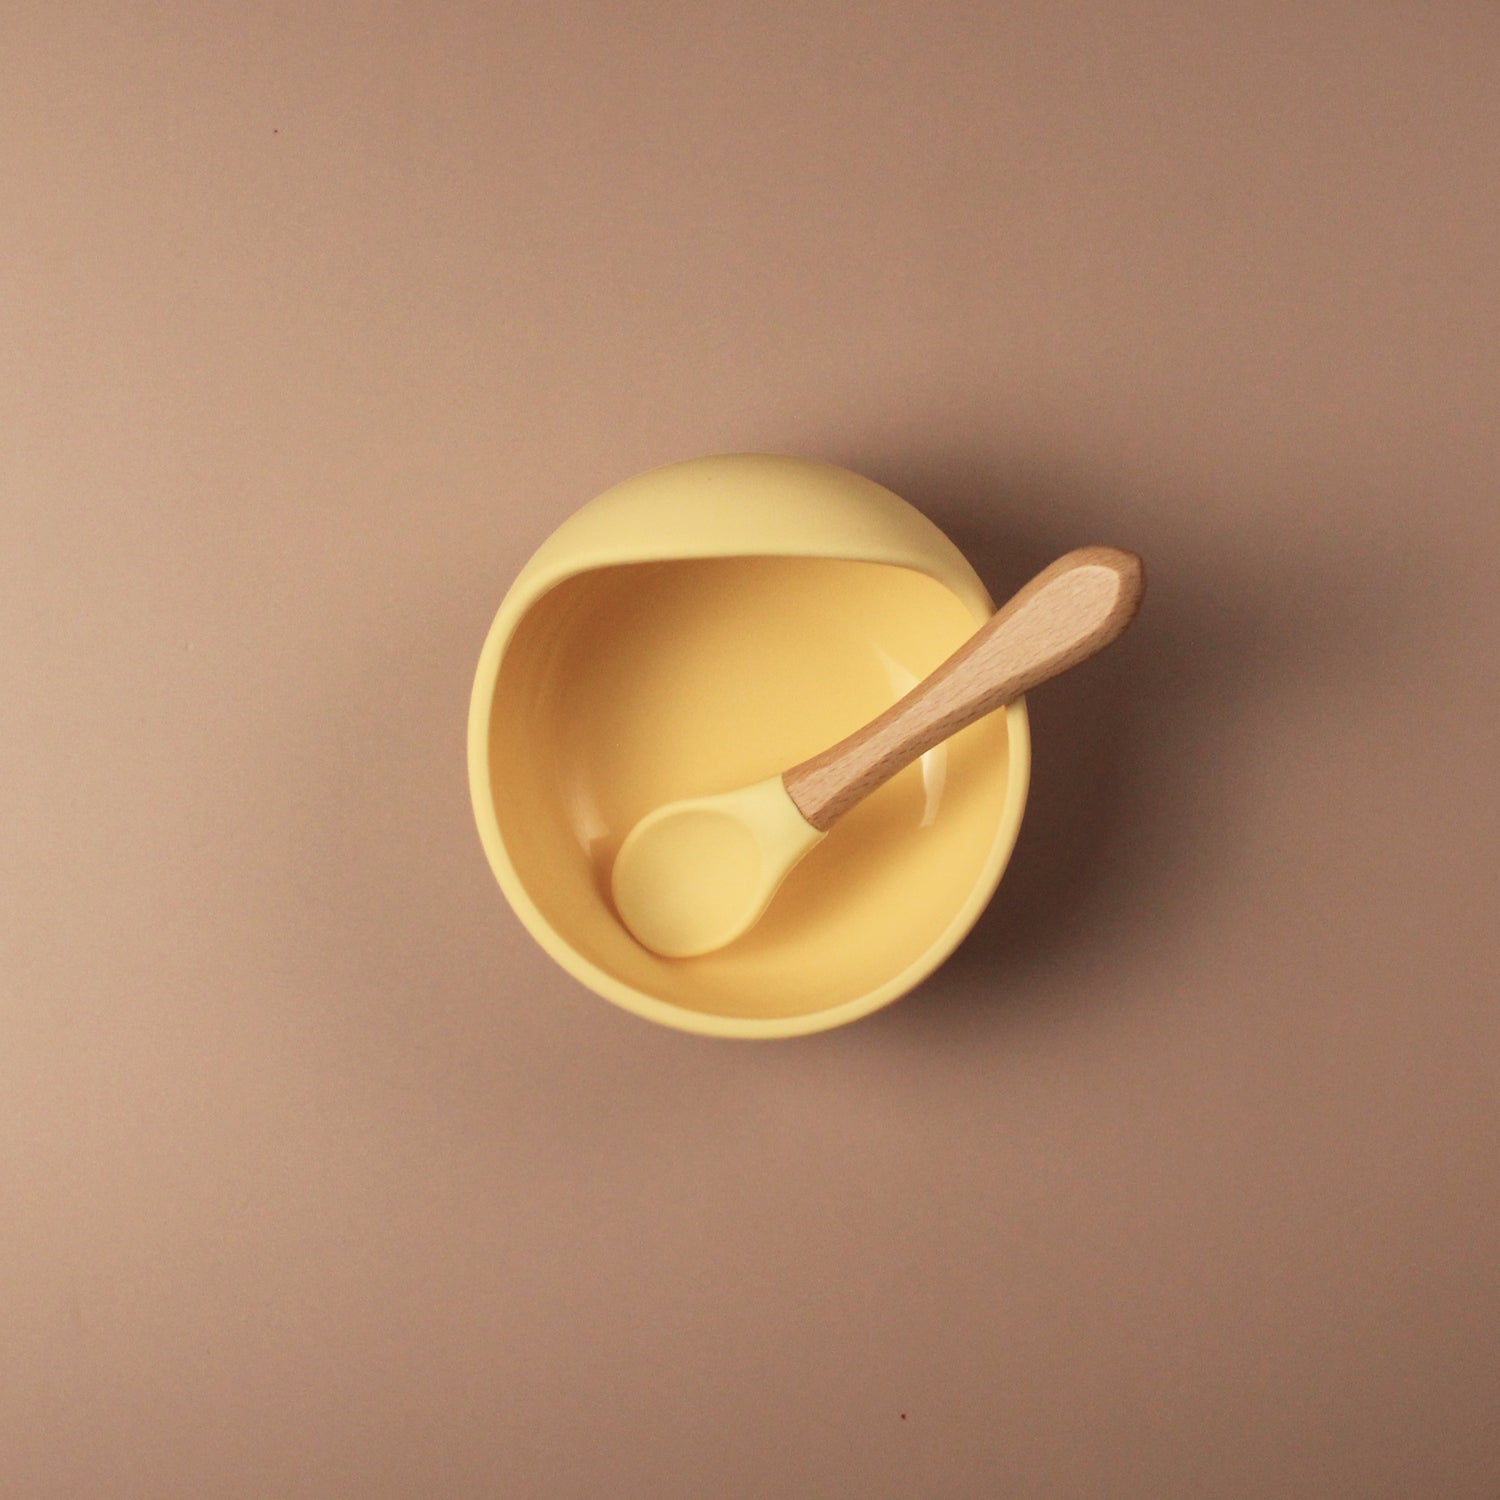 baby feeding silicone suction bowl in yellow, with matching wooden handle spoon